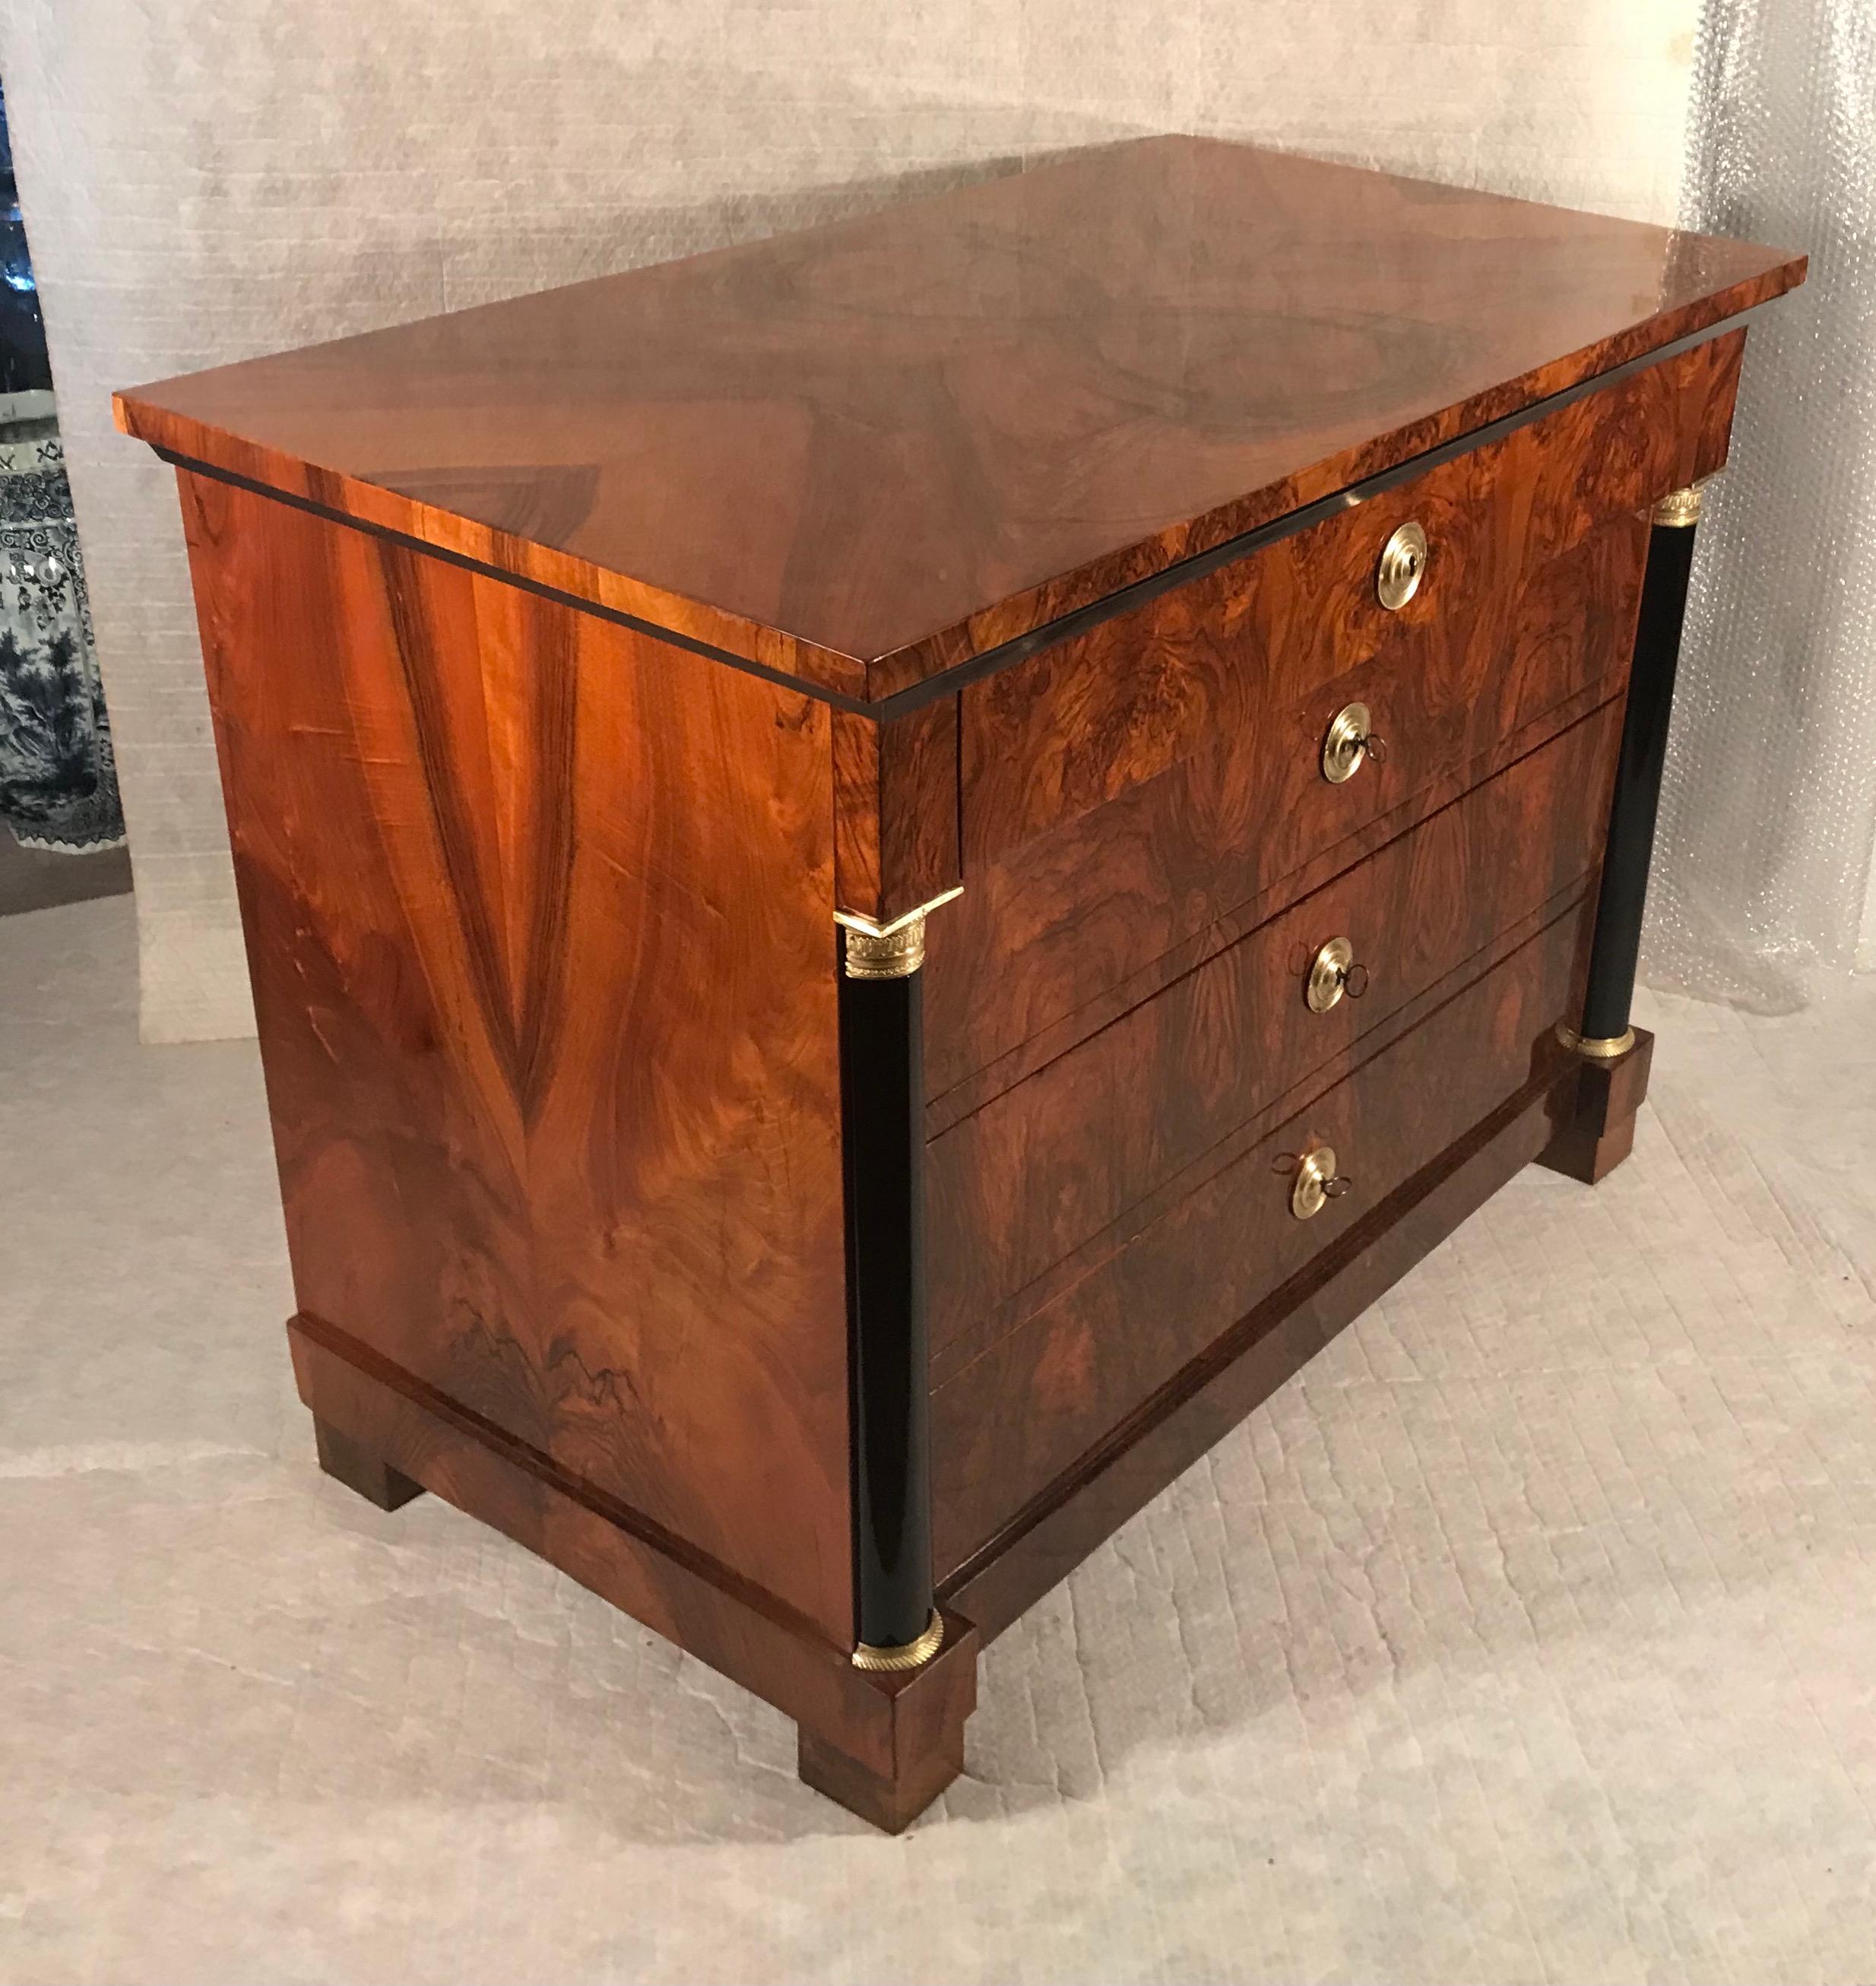 Biedermeier Chest of Drawers, Germany 1820, Walnut In Good Condition For Sale In Belmont, MA